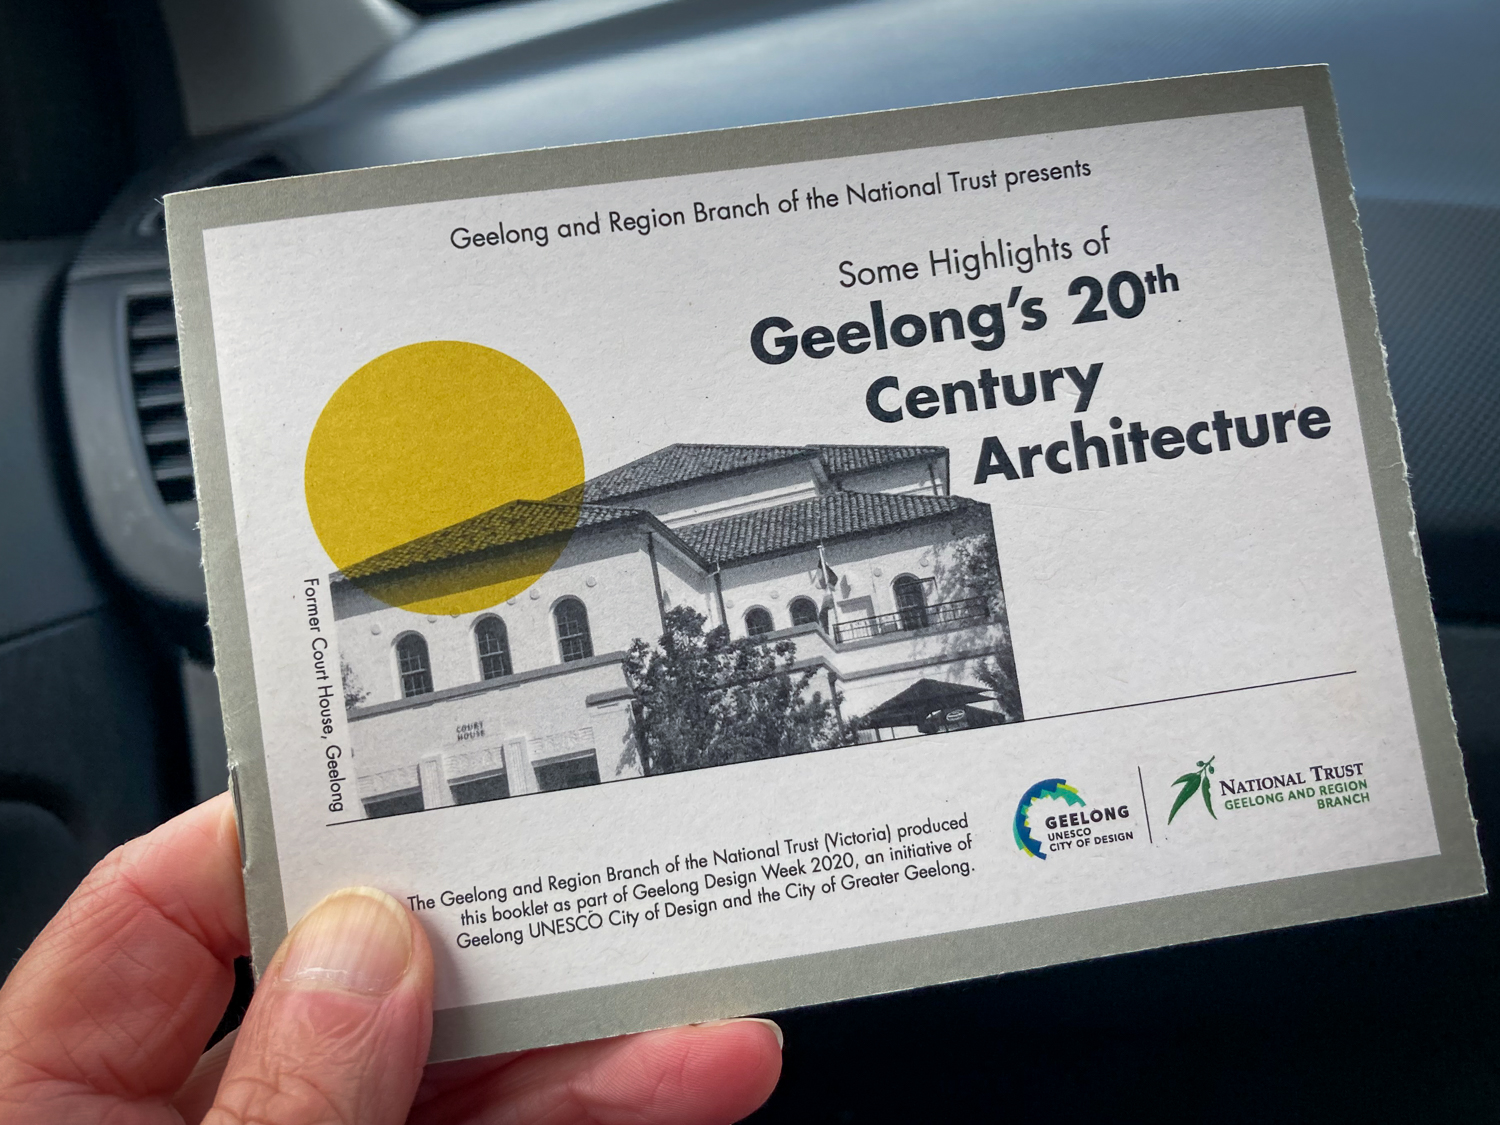 A hand holding a small booklet titled "Some Highlights of Geelong's 20th Century Architecture"